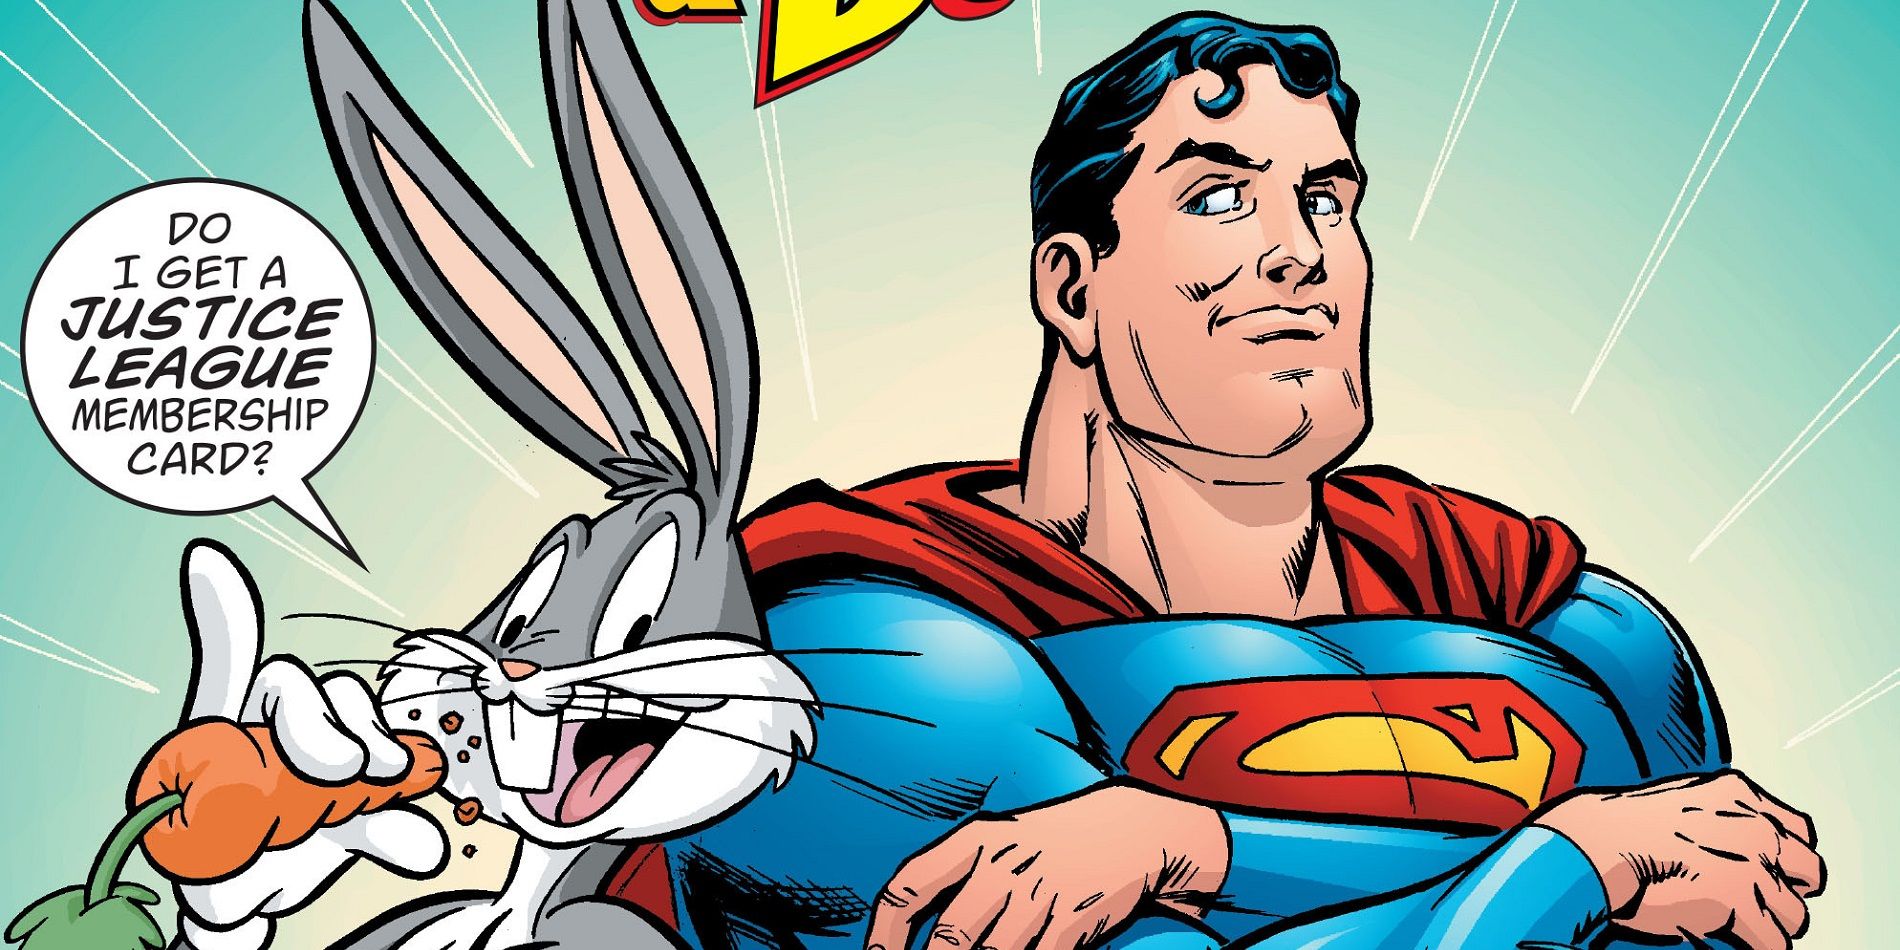 Superman and Bugs Bunny meet up in a DC and Looney Tunes comic crossover